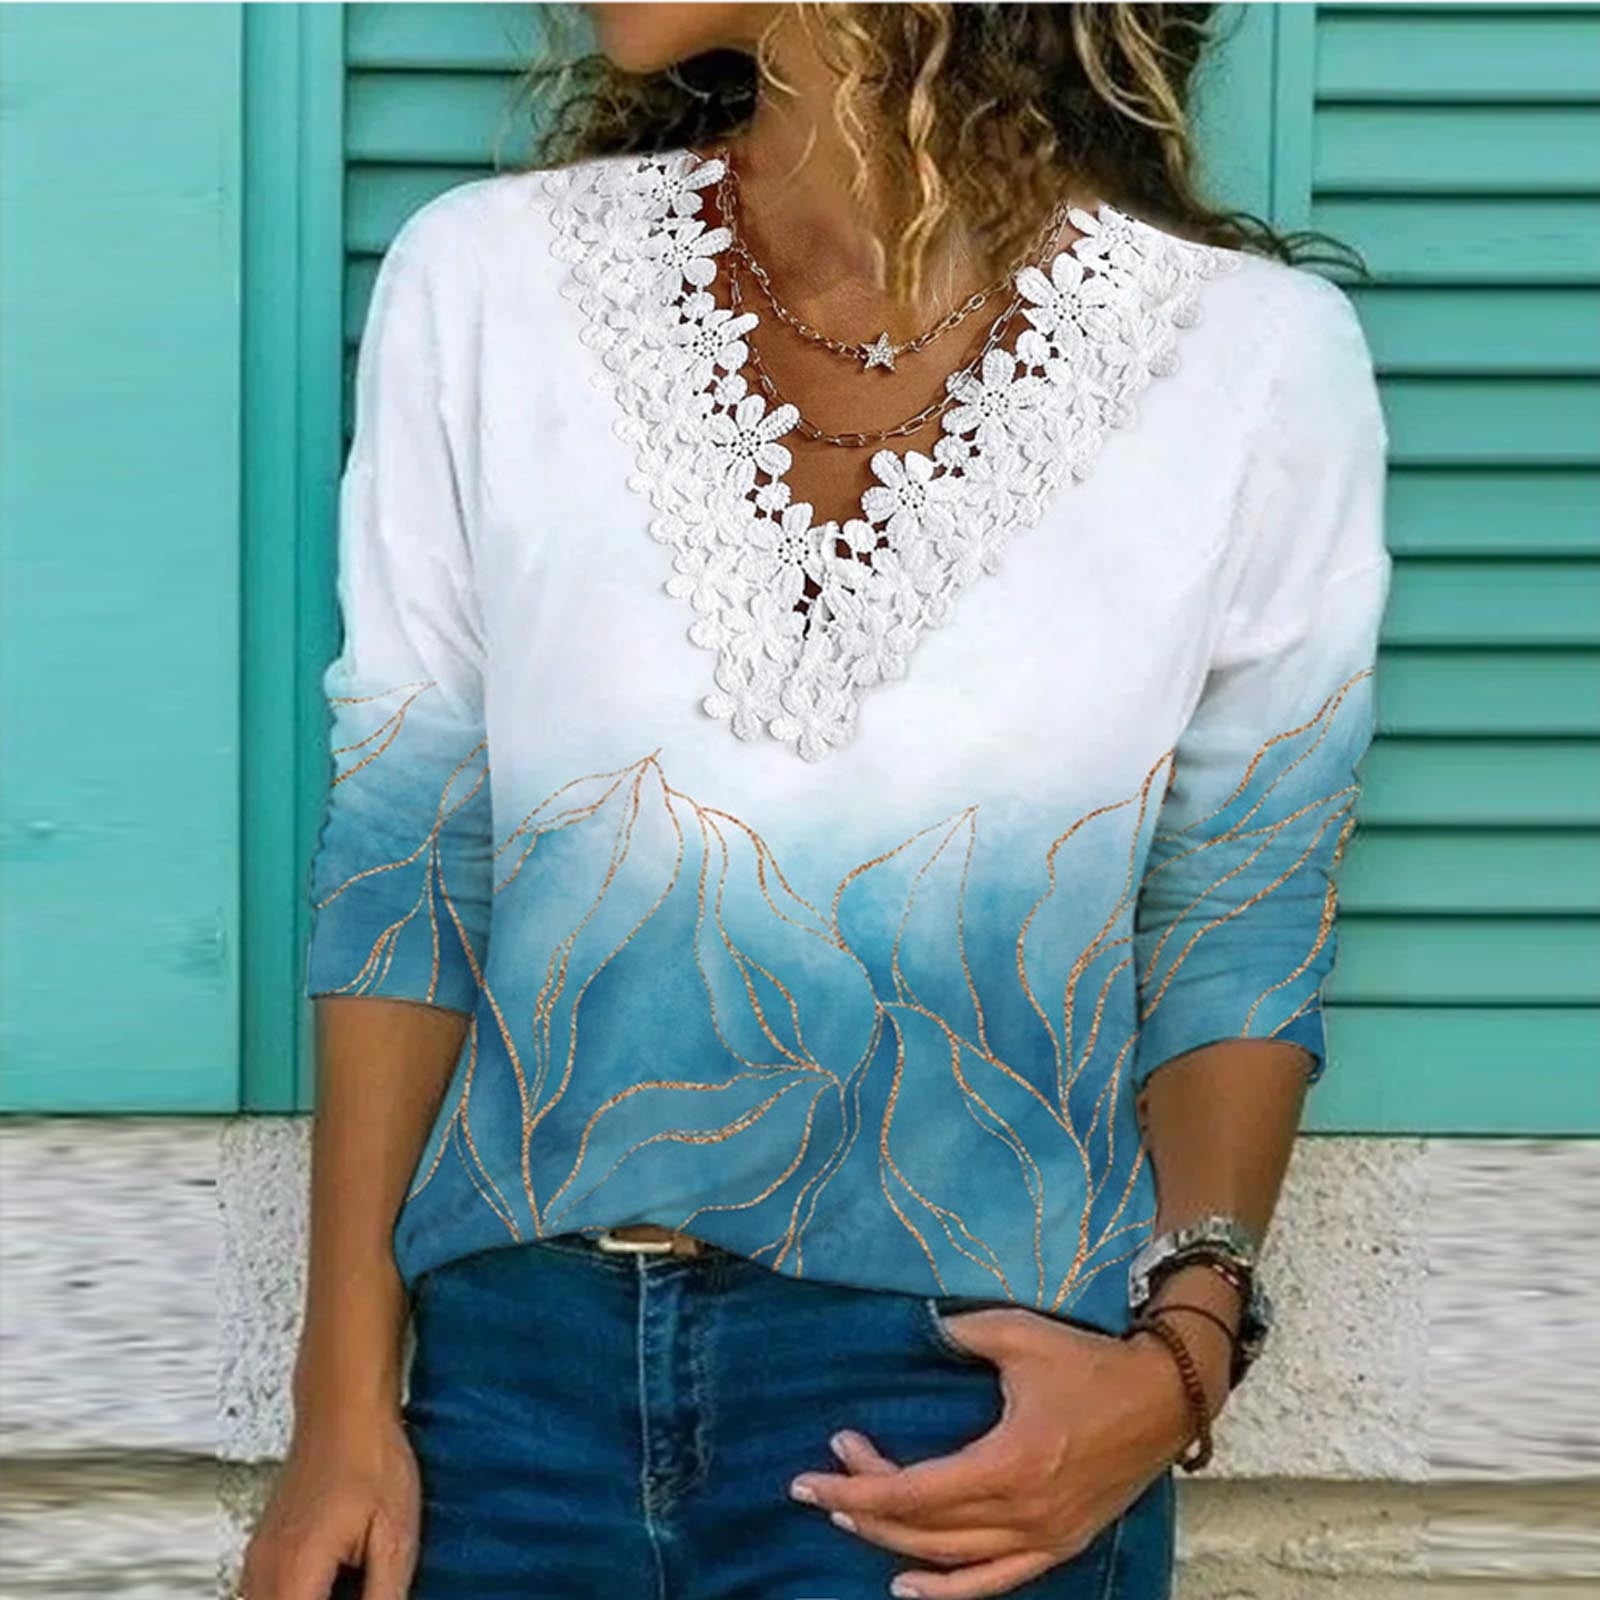 Top for Women,Clearance Women Casual Print Loose Shirts V Neck